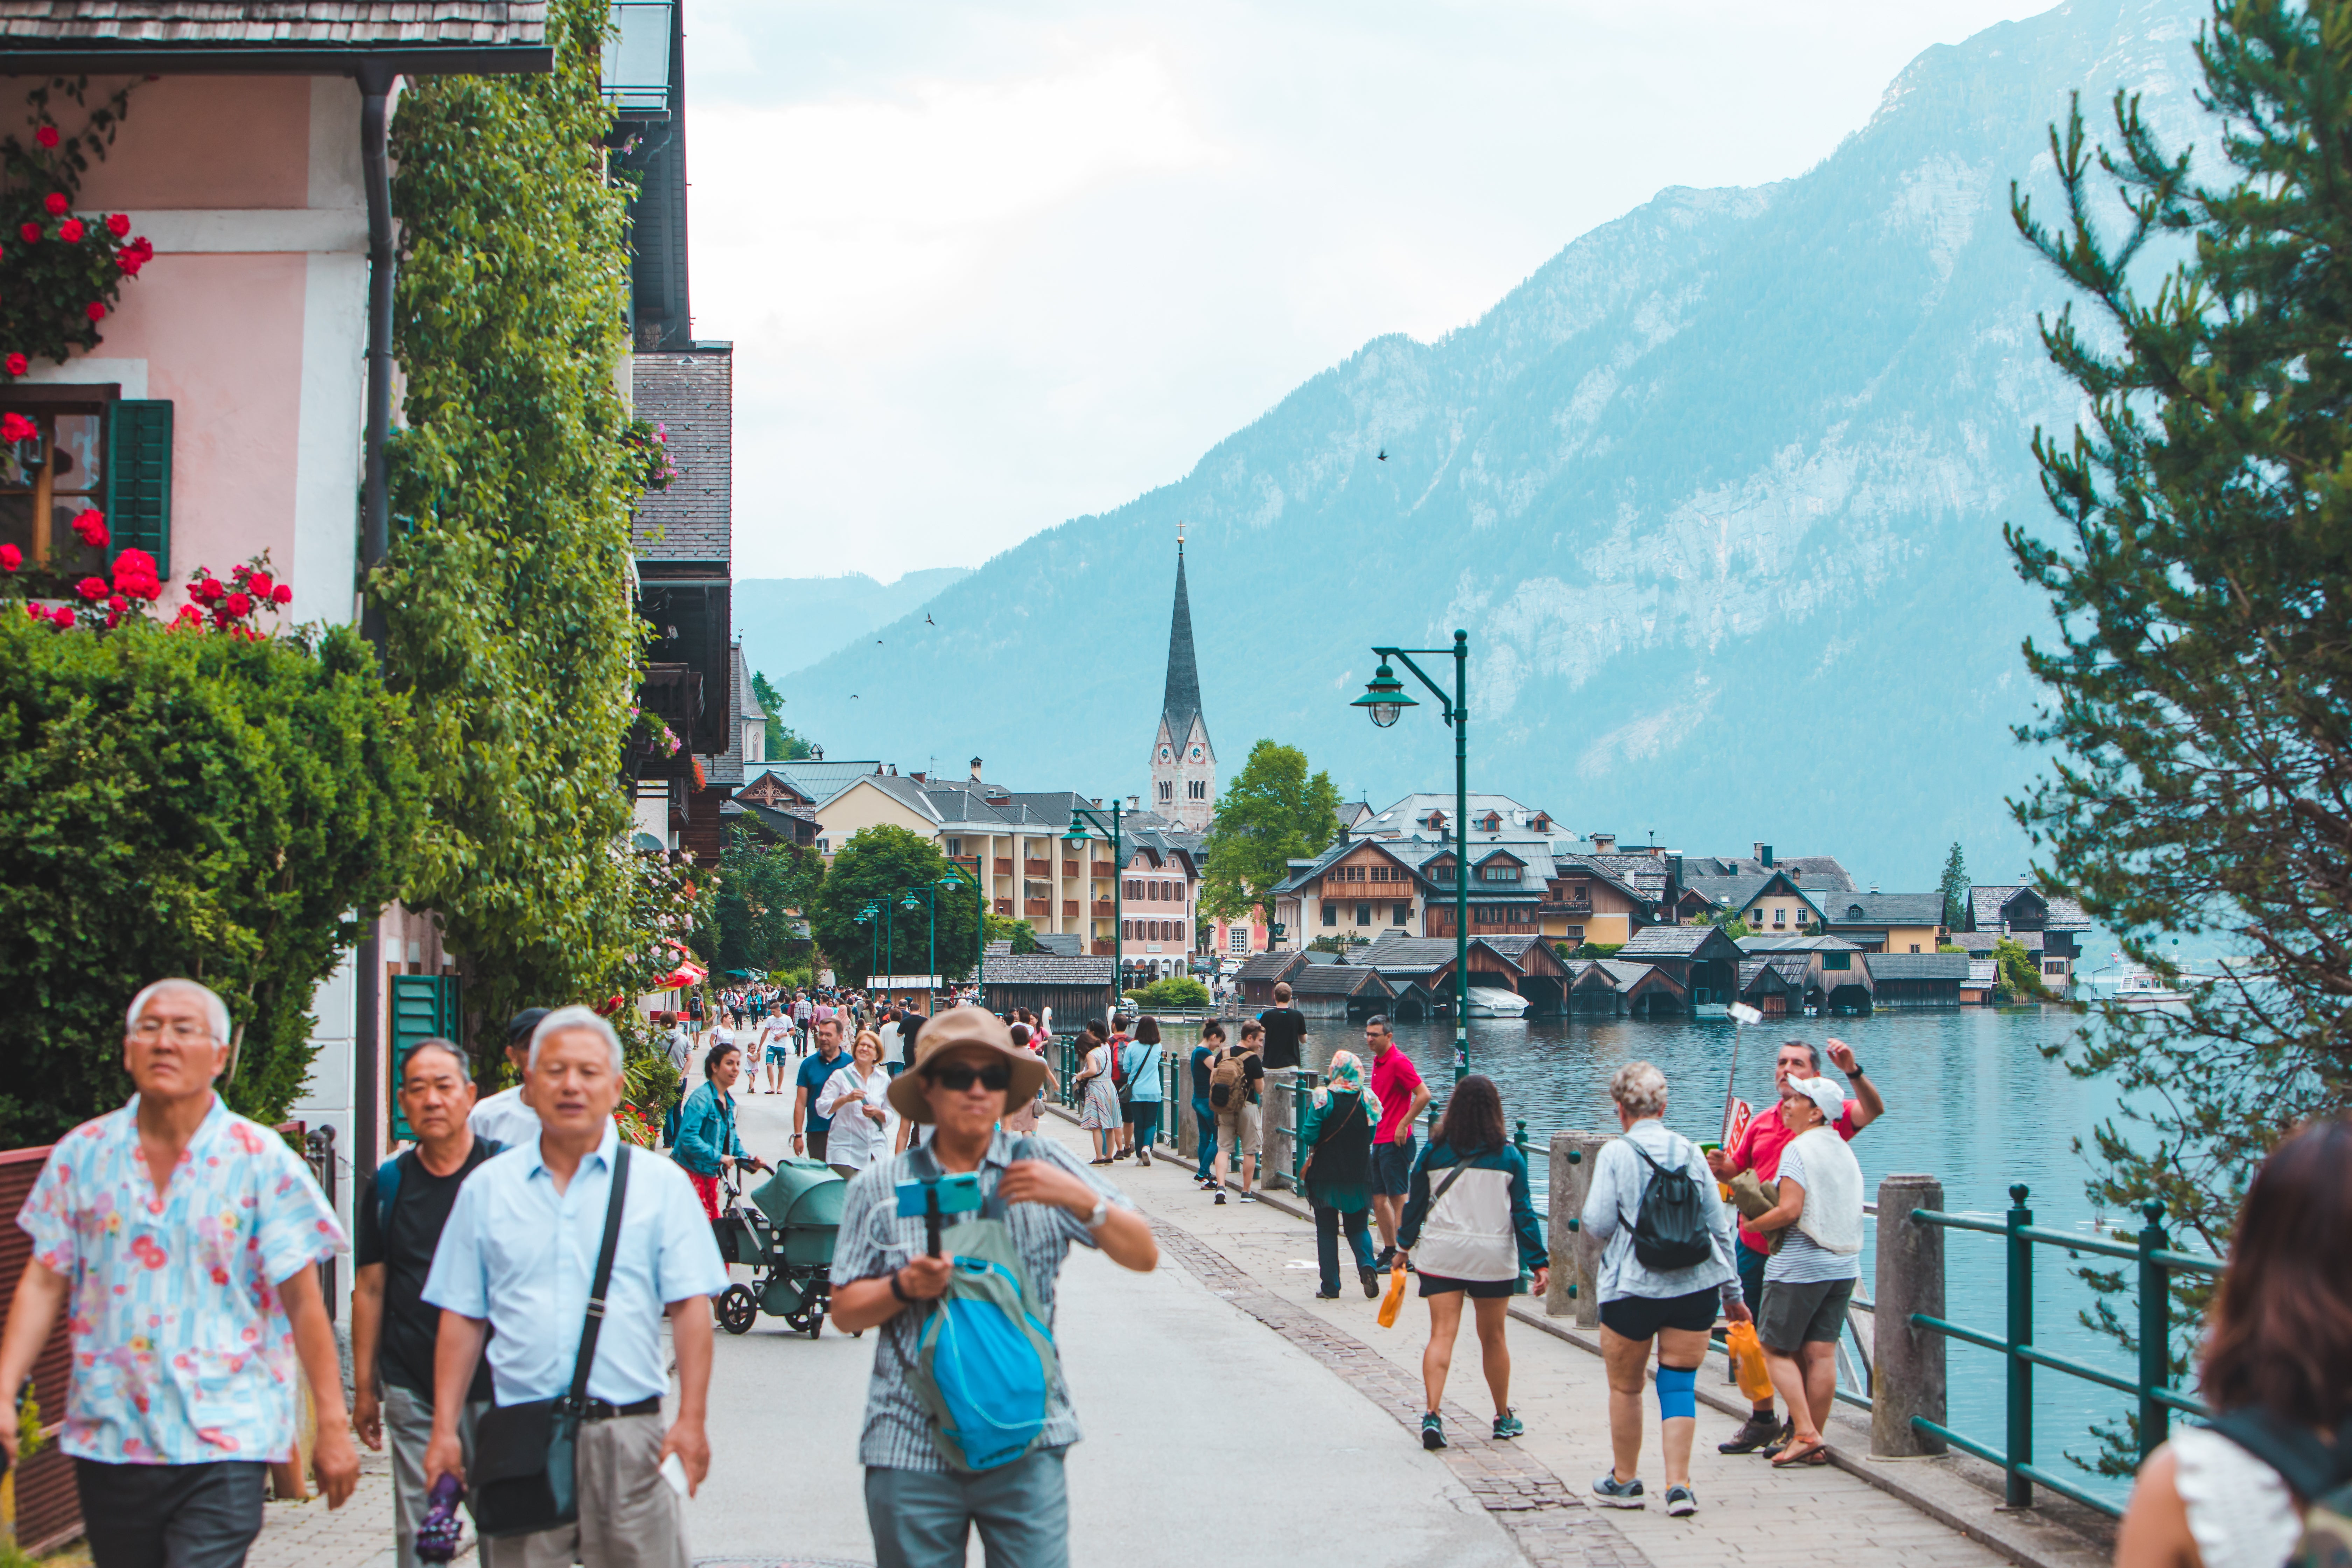 Hallstatt’s mayor intended to reduce tourist footfall by a third in 2020